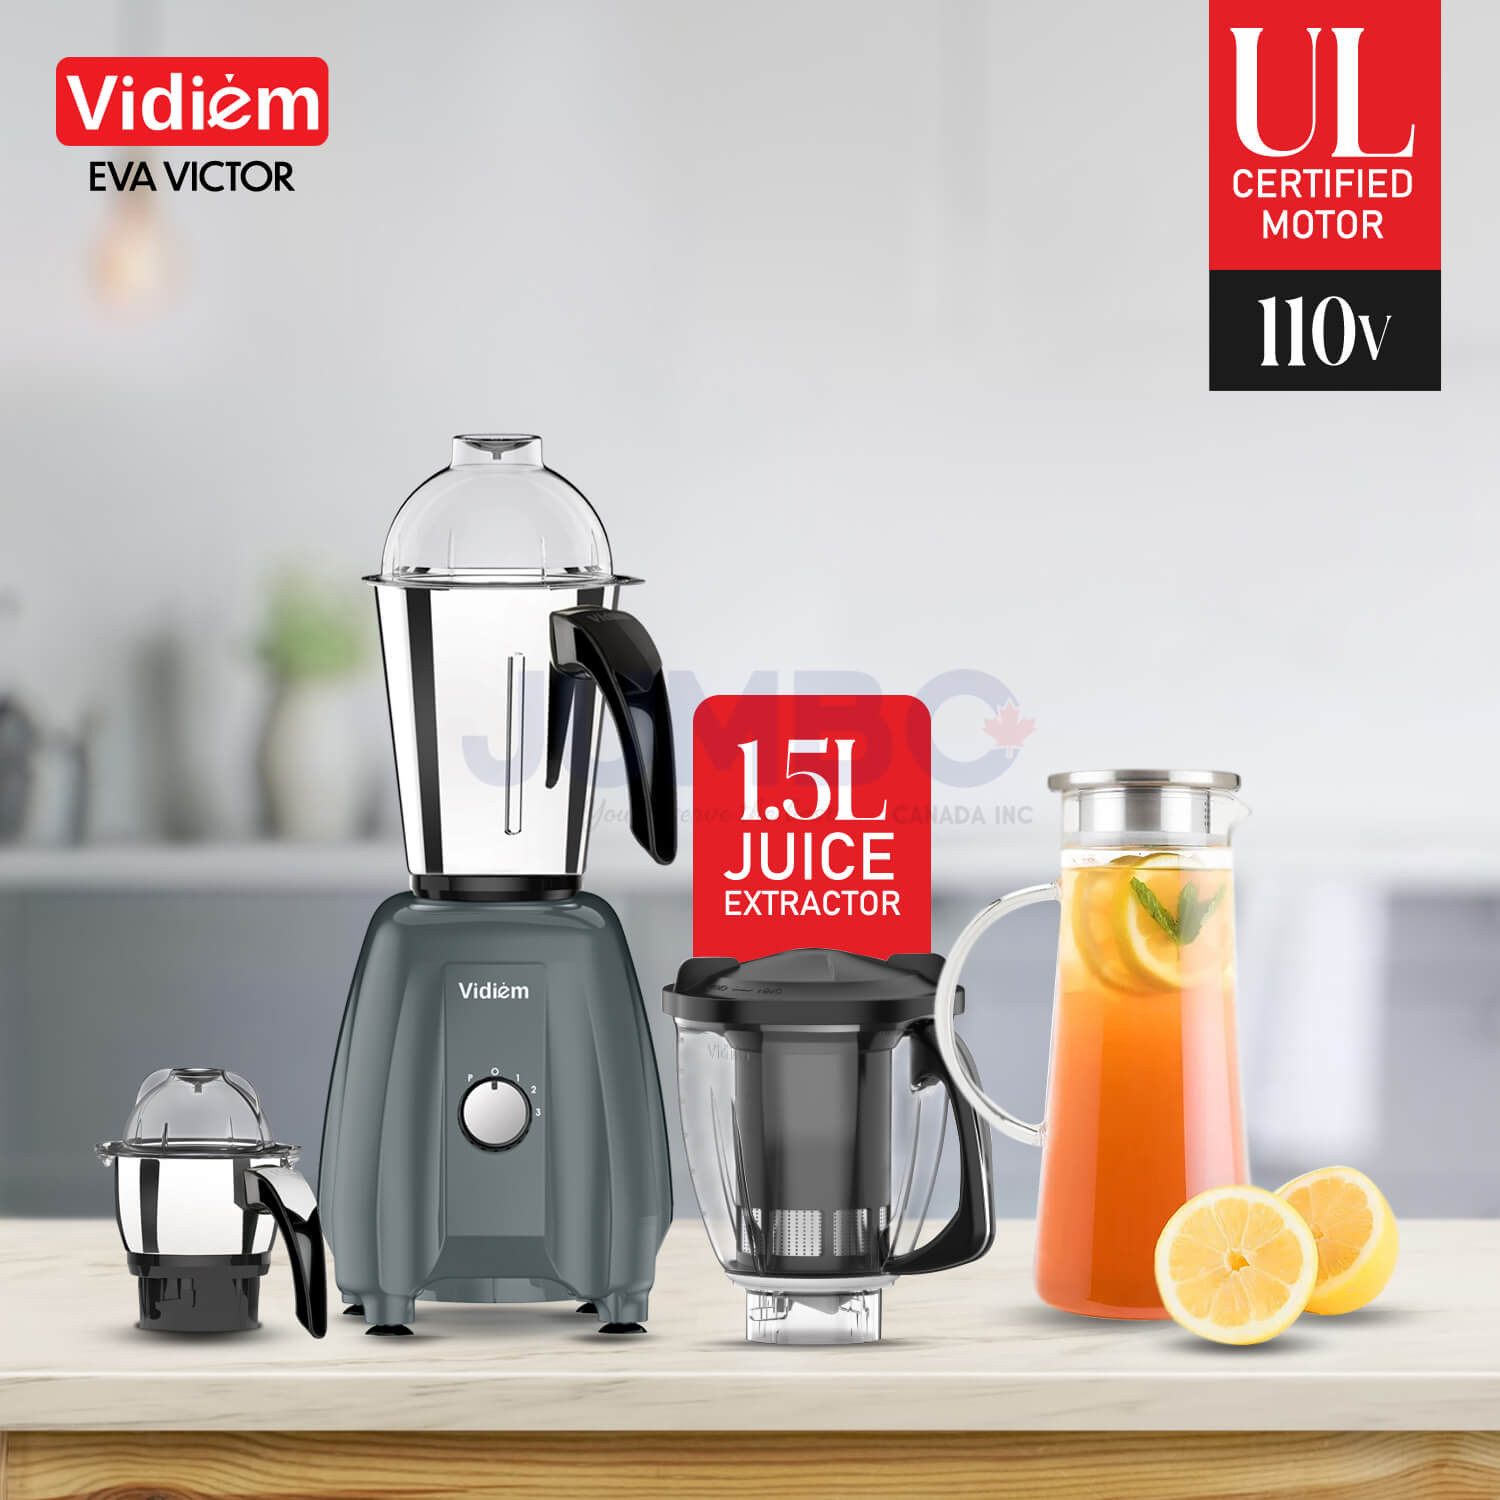 vidiem-eva-victor-650w-110v-stainless-steel-jars-indian-mixer-grinder-spice-coffee-grinder-with-almond-nut-milk-juice-extractor-for-use-in-canada-usa5